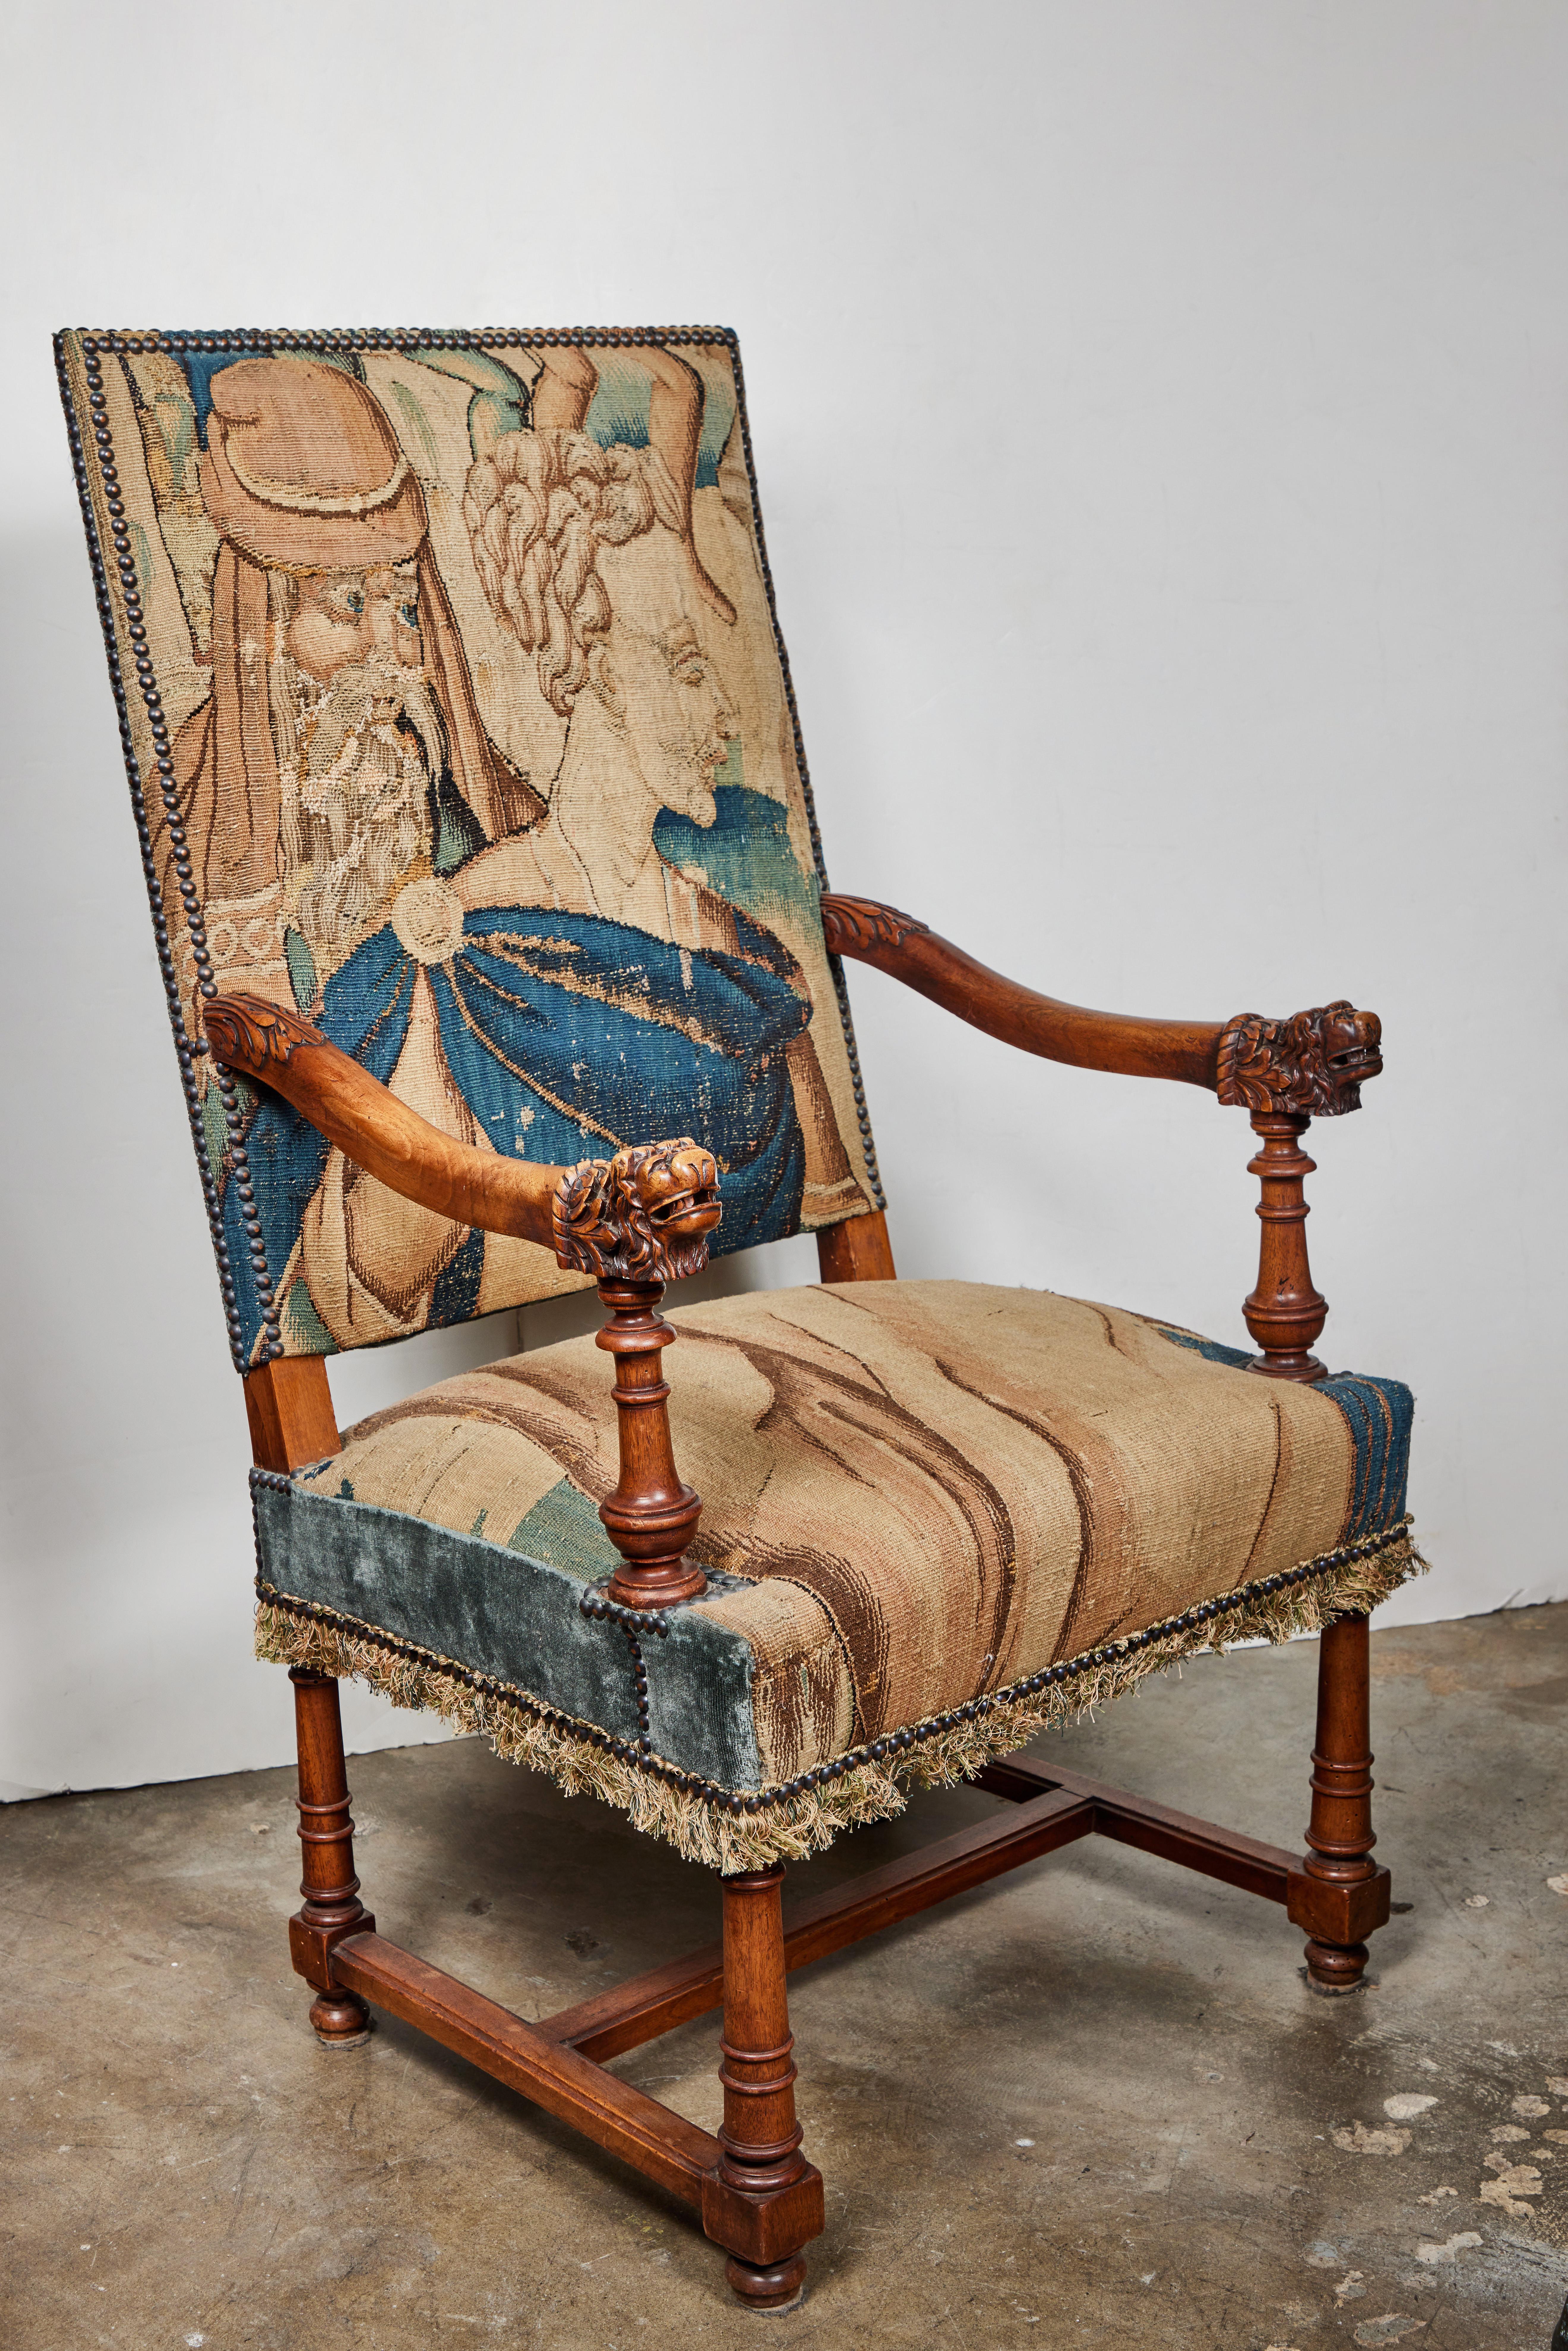 A beautiful pair of hand-carved, 19th c., French chairs with turned legs and arms terminating in lion heads. Each covered in 18th c., Flemish tapestry fabric and lined with bronze nail heads.